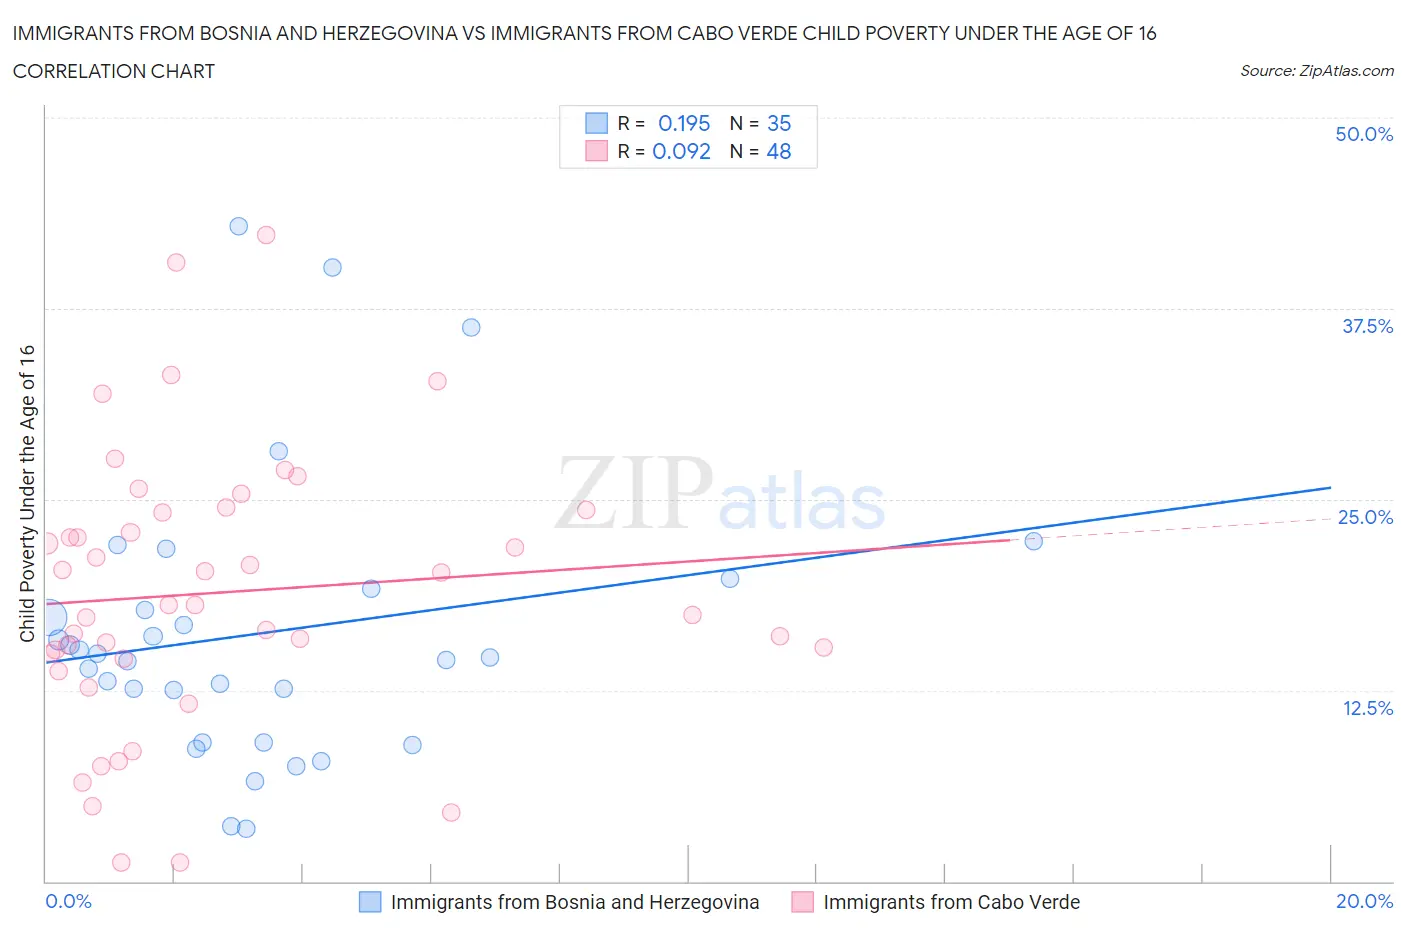 Immigrants from Bosnia and Herzegovina vs Immigrants from Cabo Verde Child Poverty Under the Age of 16